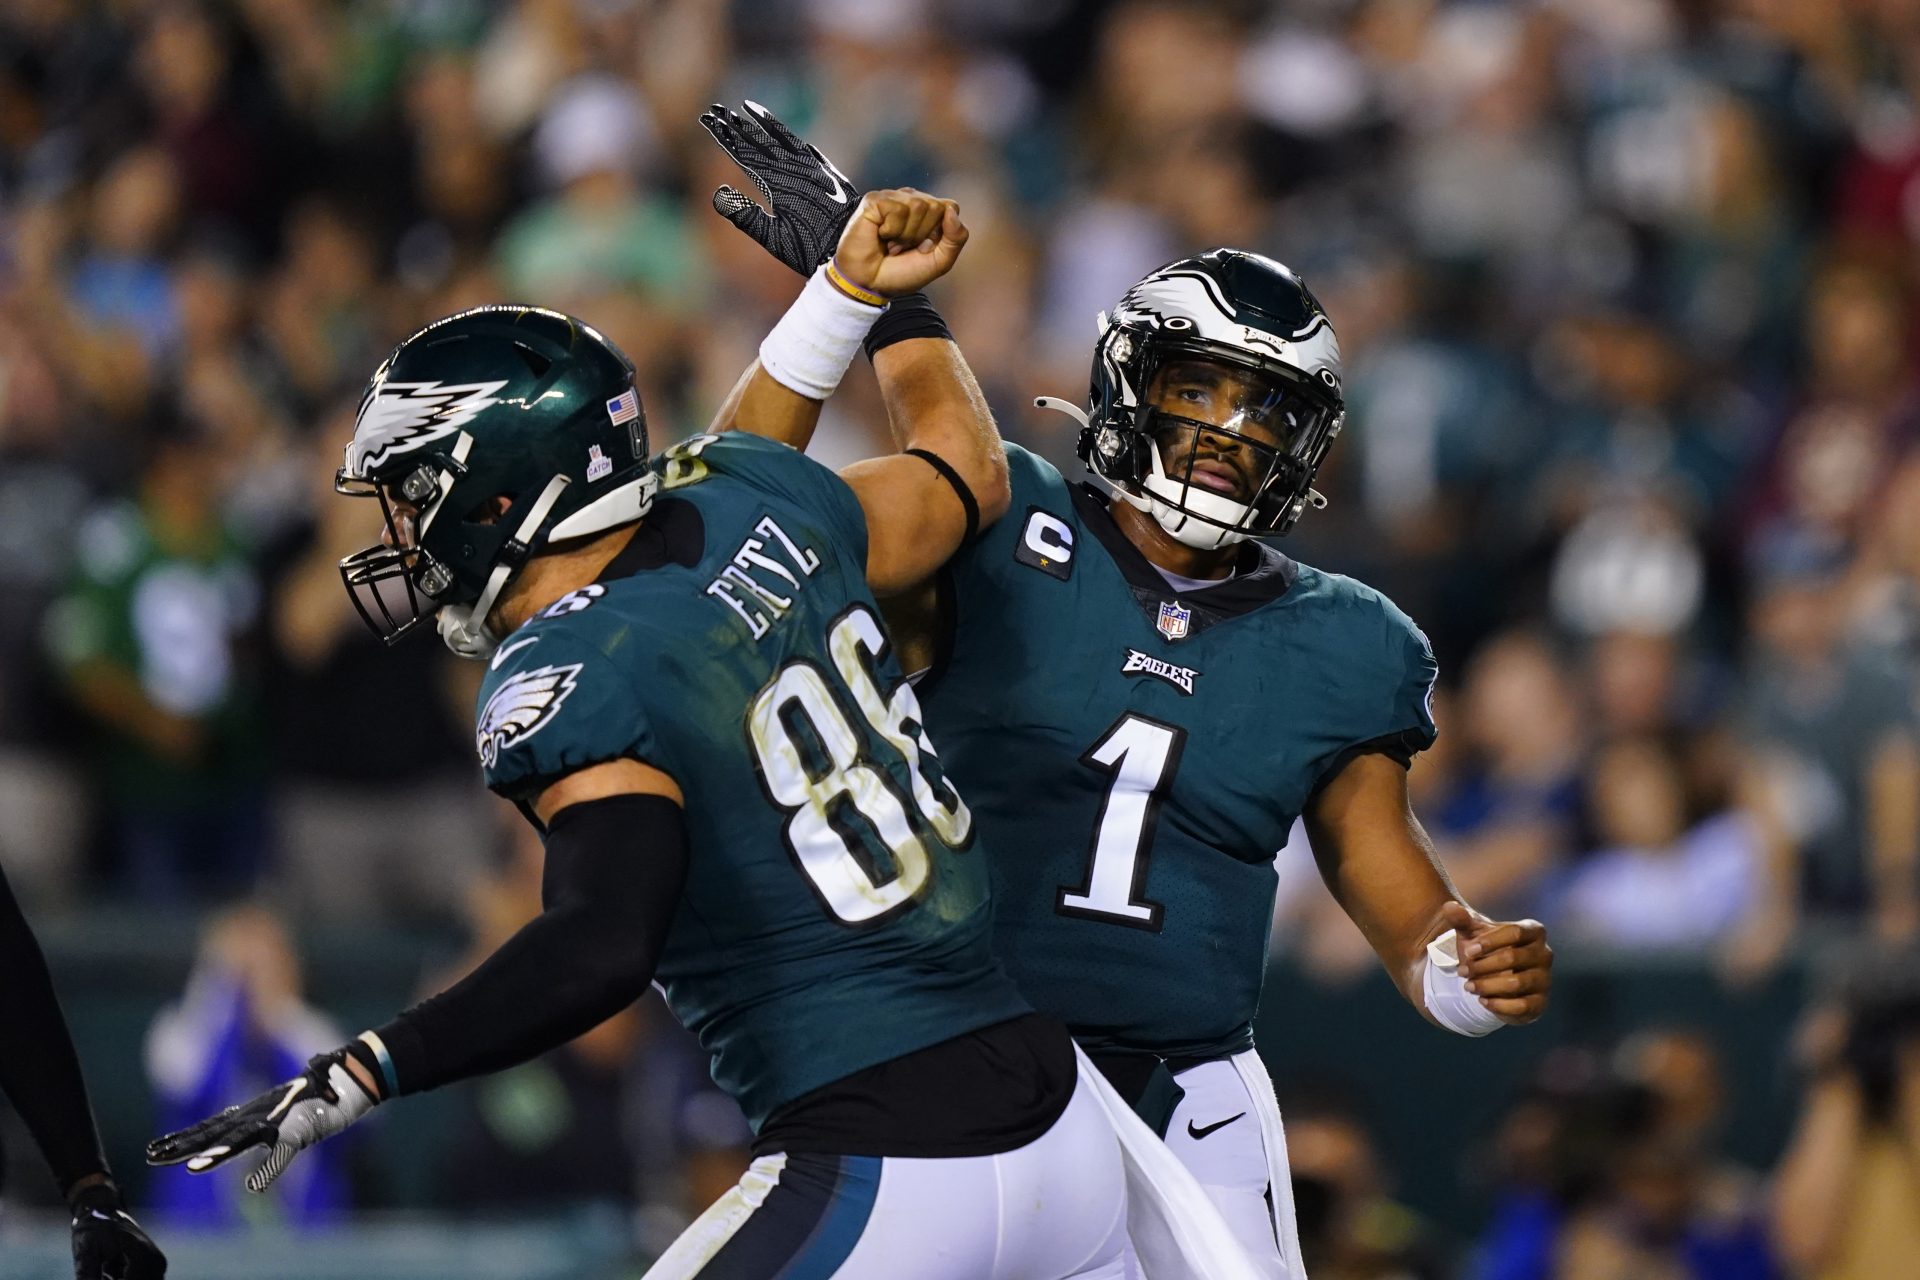 Philadelphia Eagles quarterback Jalen Hurts (1) celebrates his touchdown with Philadelphia Eagles tight end Zach Ertz (86) during the second half of an NFL football game against the Tampa Bay Buccaneers on Thursday, Oct. 14, 2021, in Philadelphia.